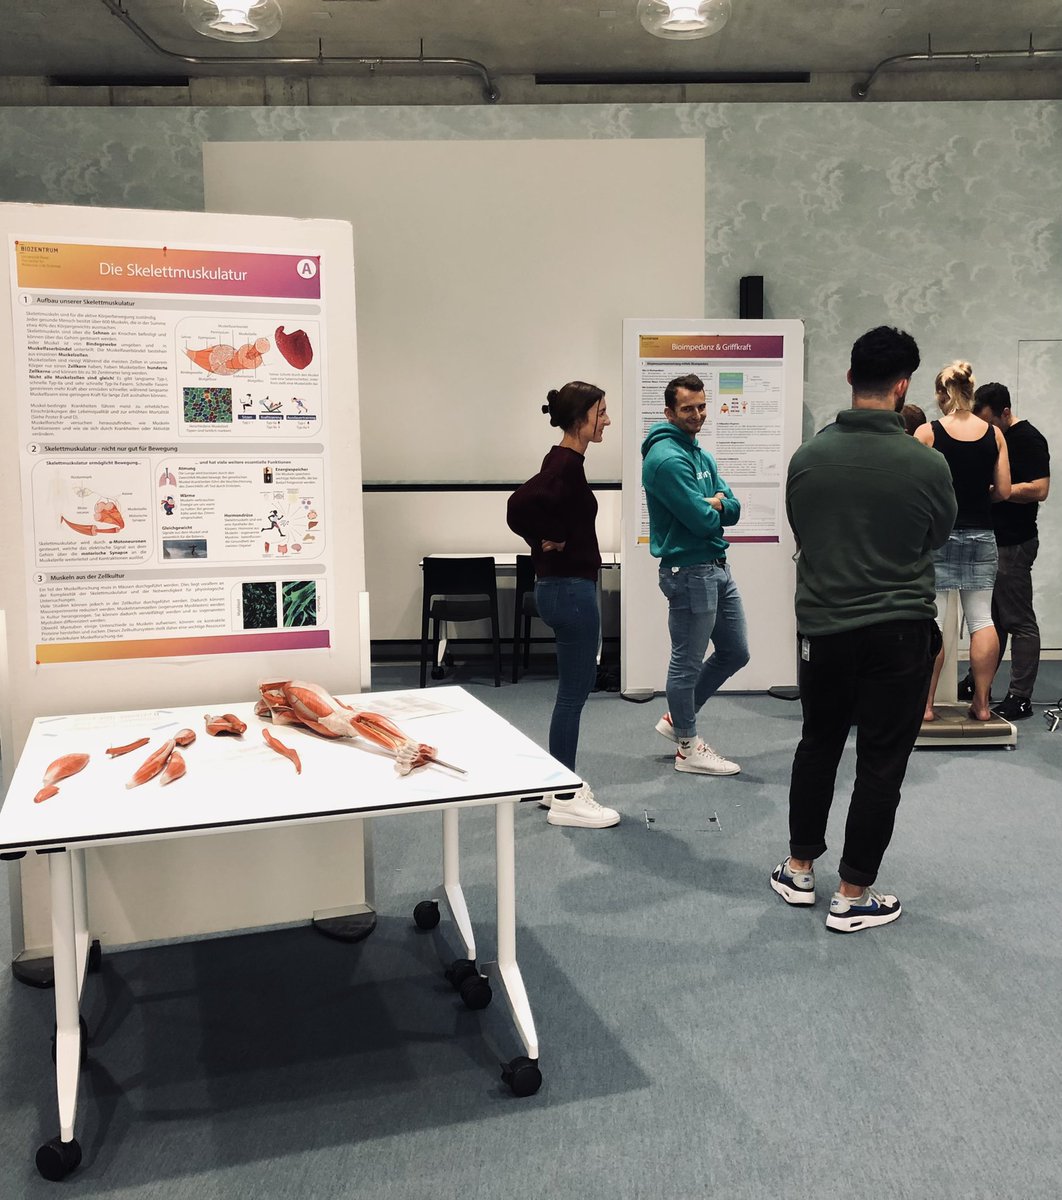 Join the @RueggLab & @HandschinLab at the @biozentrum #openhouseday today! Learn about how muscles work and break down during disease - come measure your grip strength 💪💪 and body composition 🔎